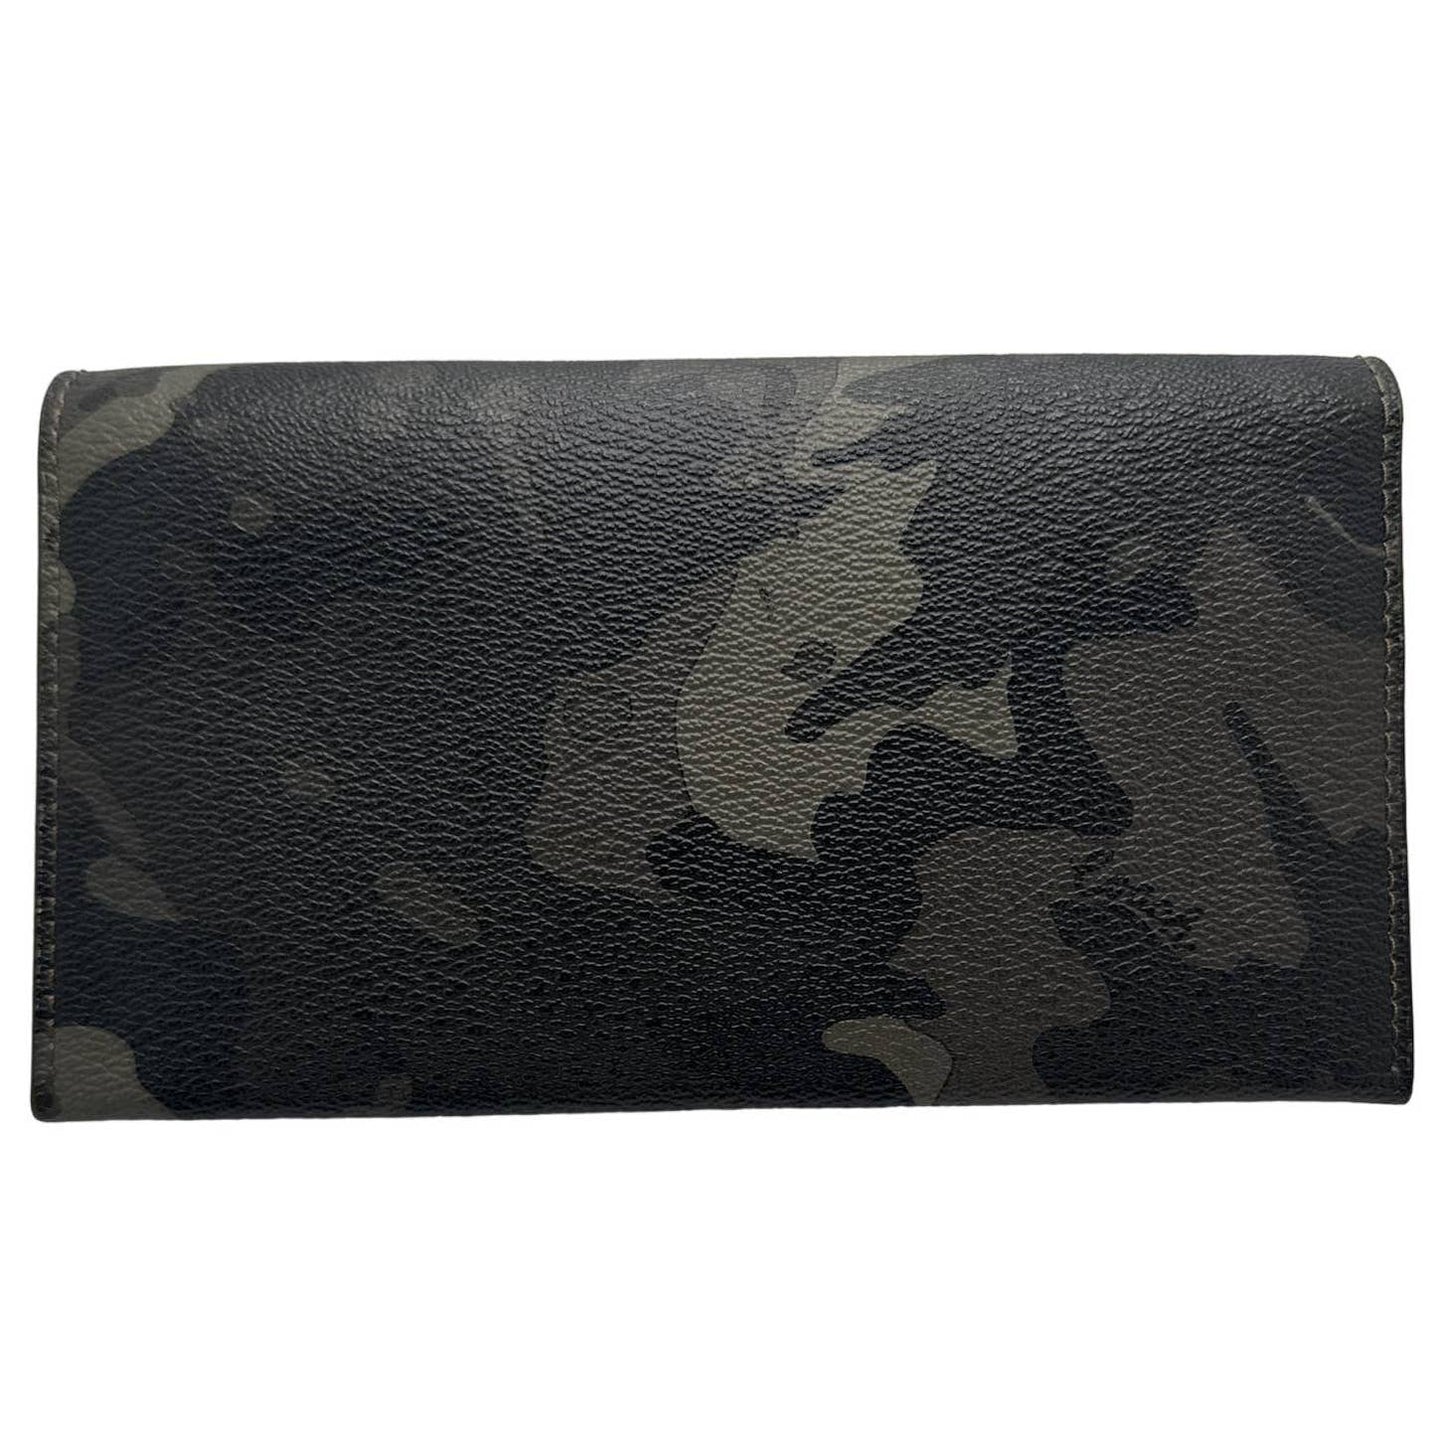 COACH Camouflago Universal Black / Green Wallet with Phone Holder